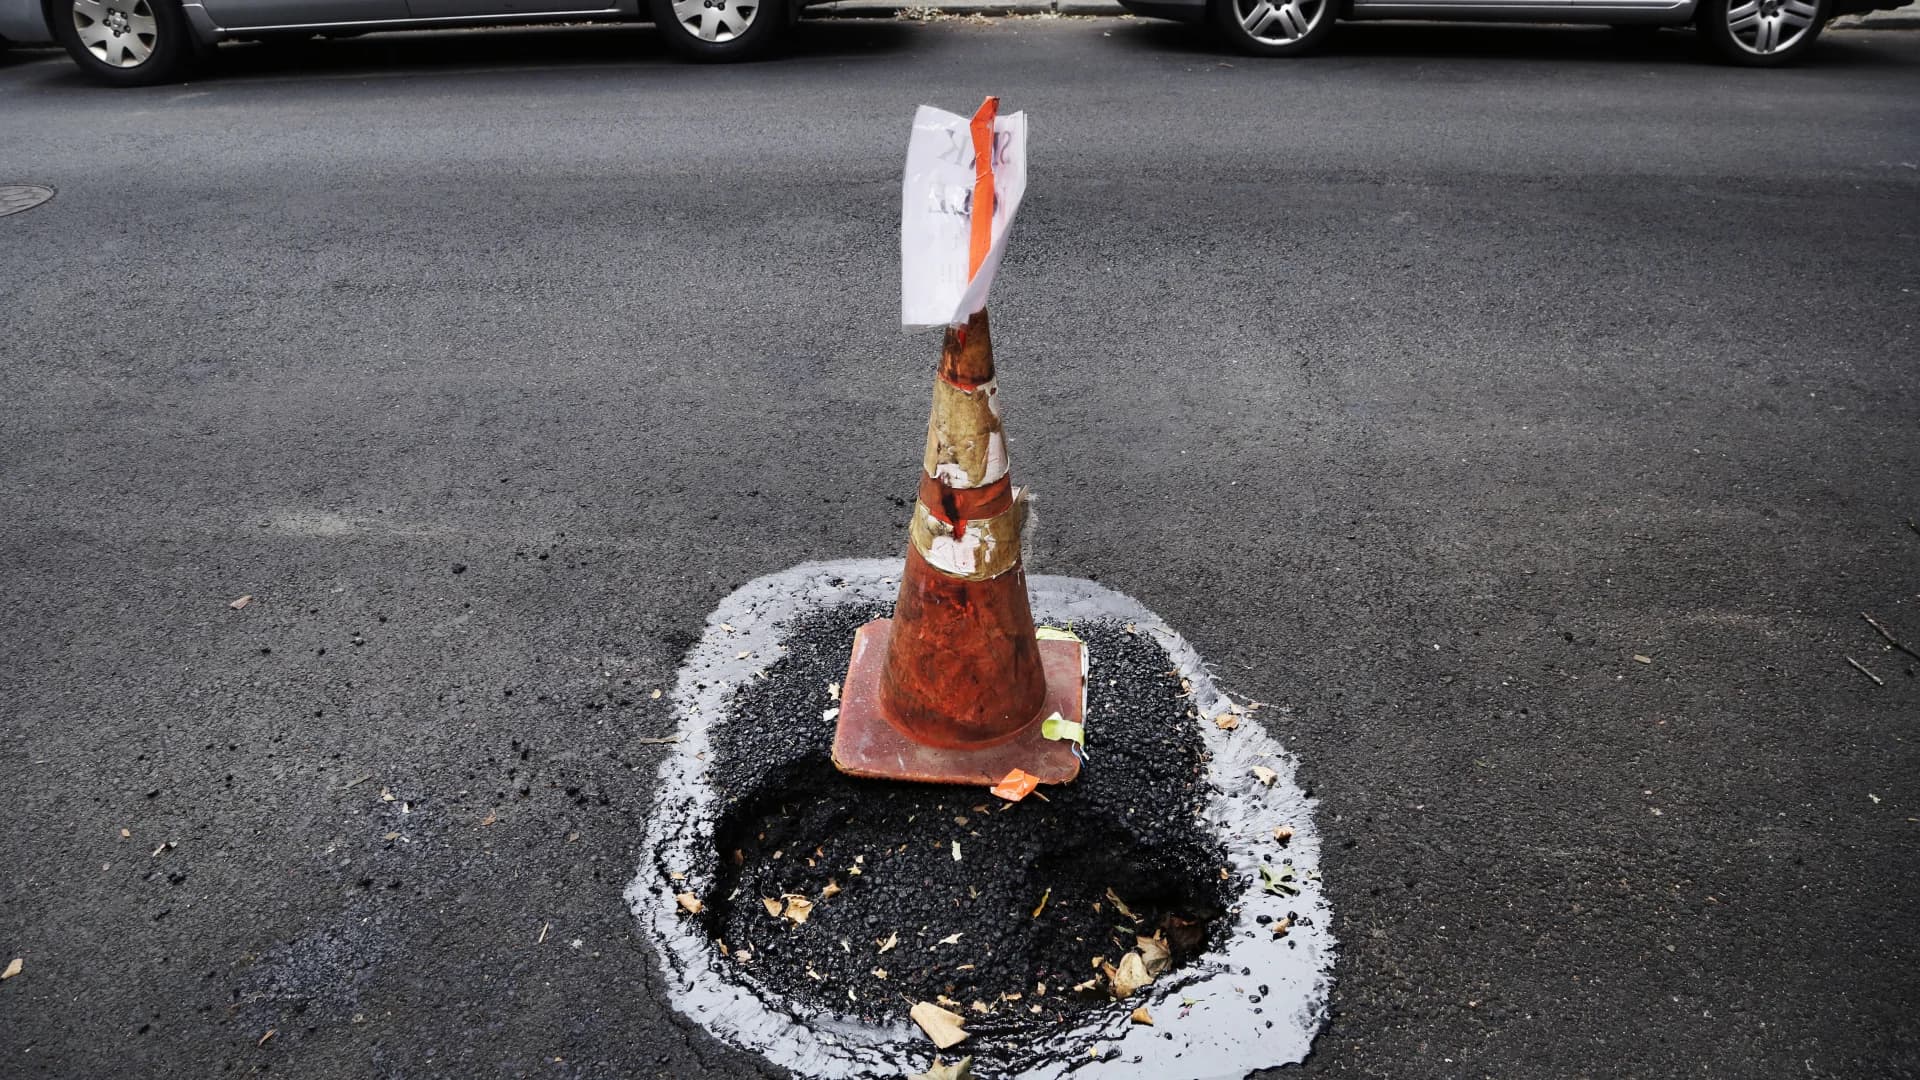 Guide: Who to call for pothole complaints on Long Island